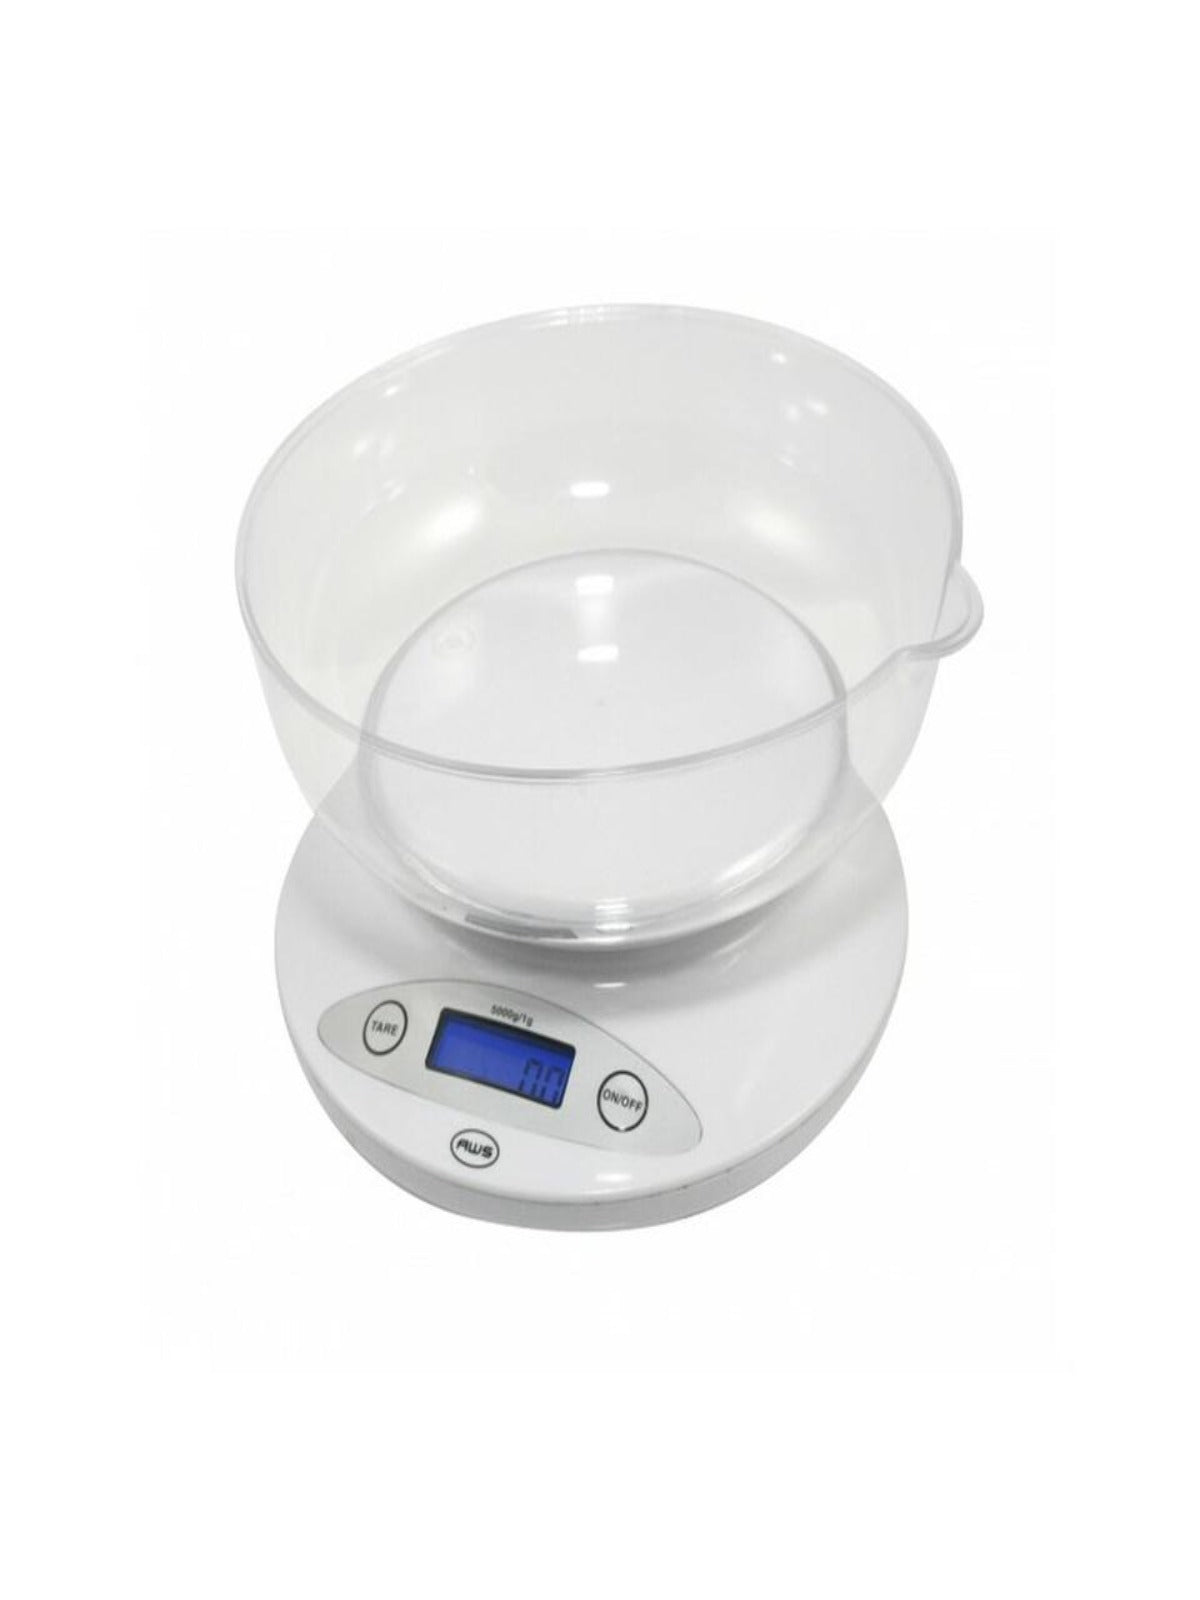 DIGITAL PRECISION KITCHEN SCALE WITH REMOVABLE BOWL, 2000G X 0.1G (2K-BOWL)